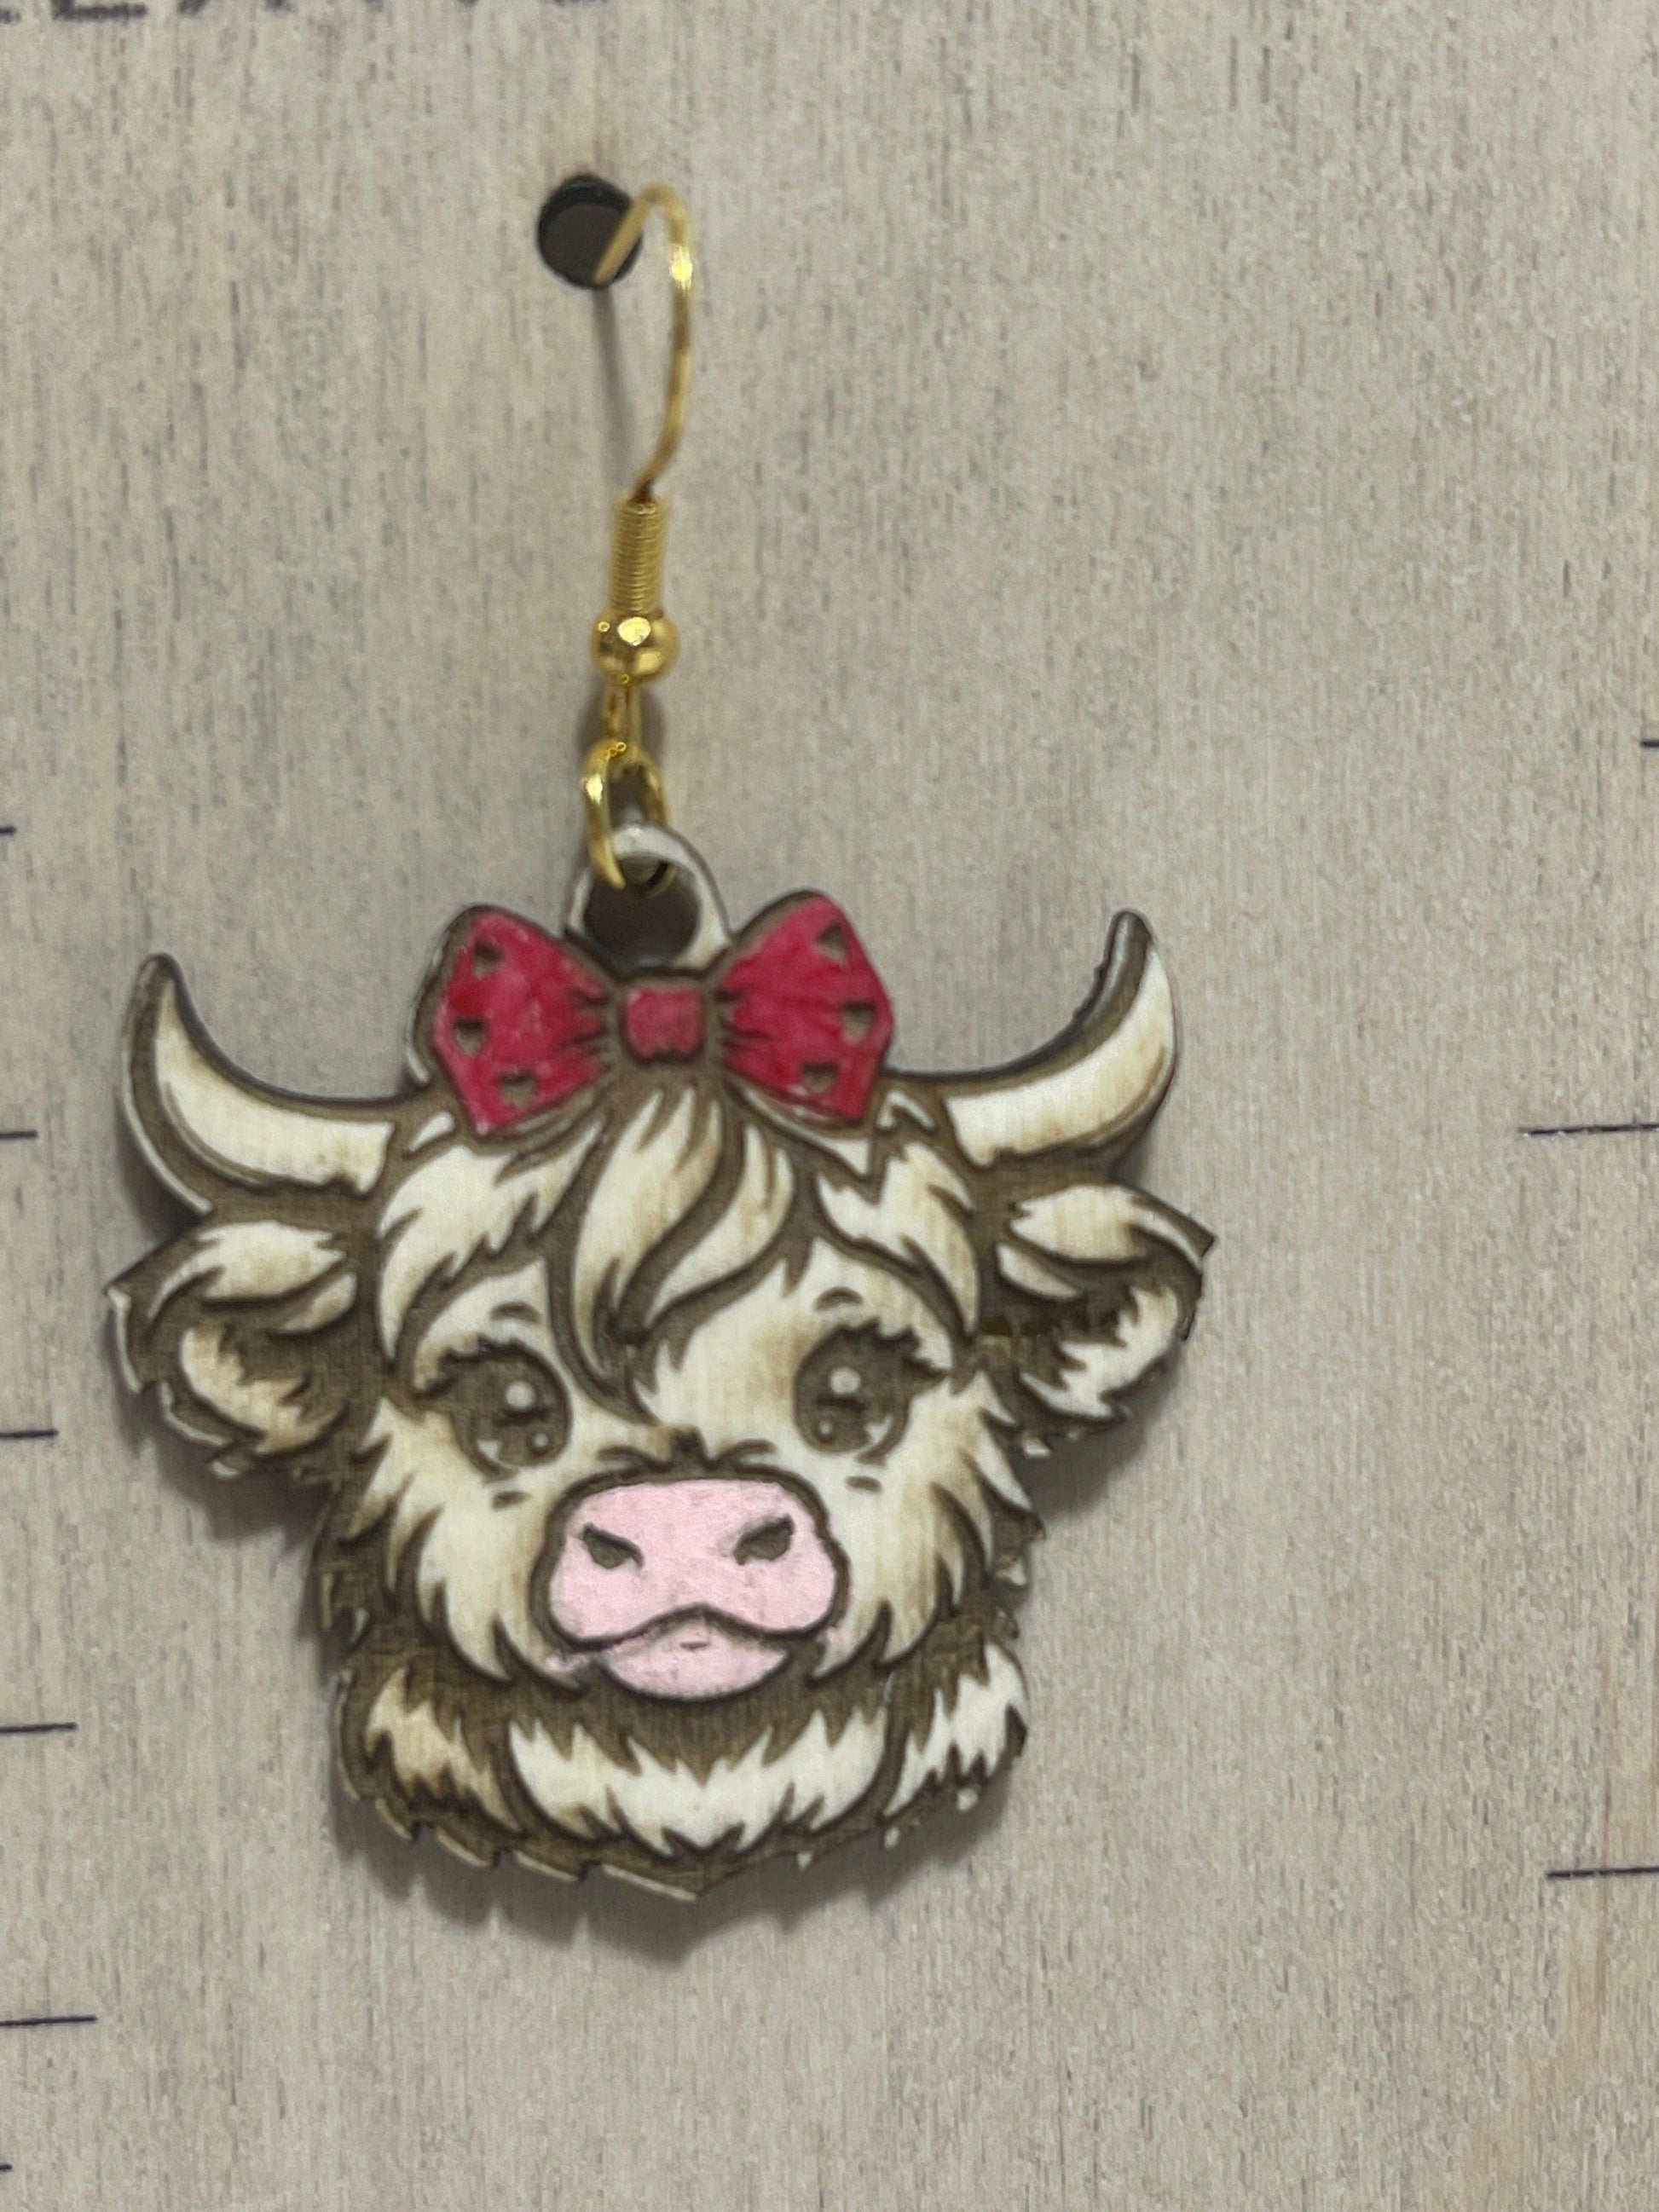 The Absolute Cutest Highland Cow Earrings - Live Loud Creations